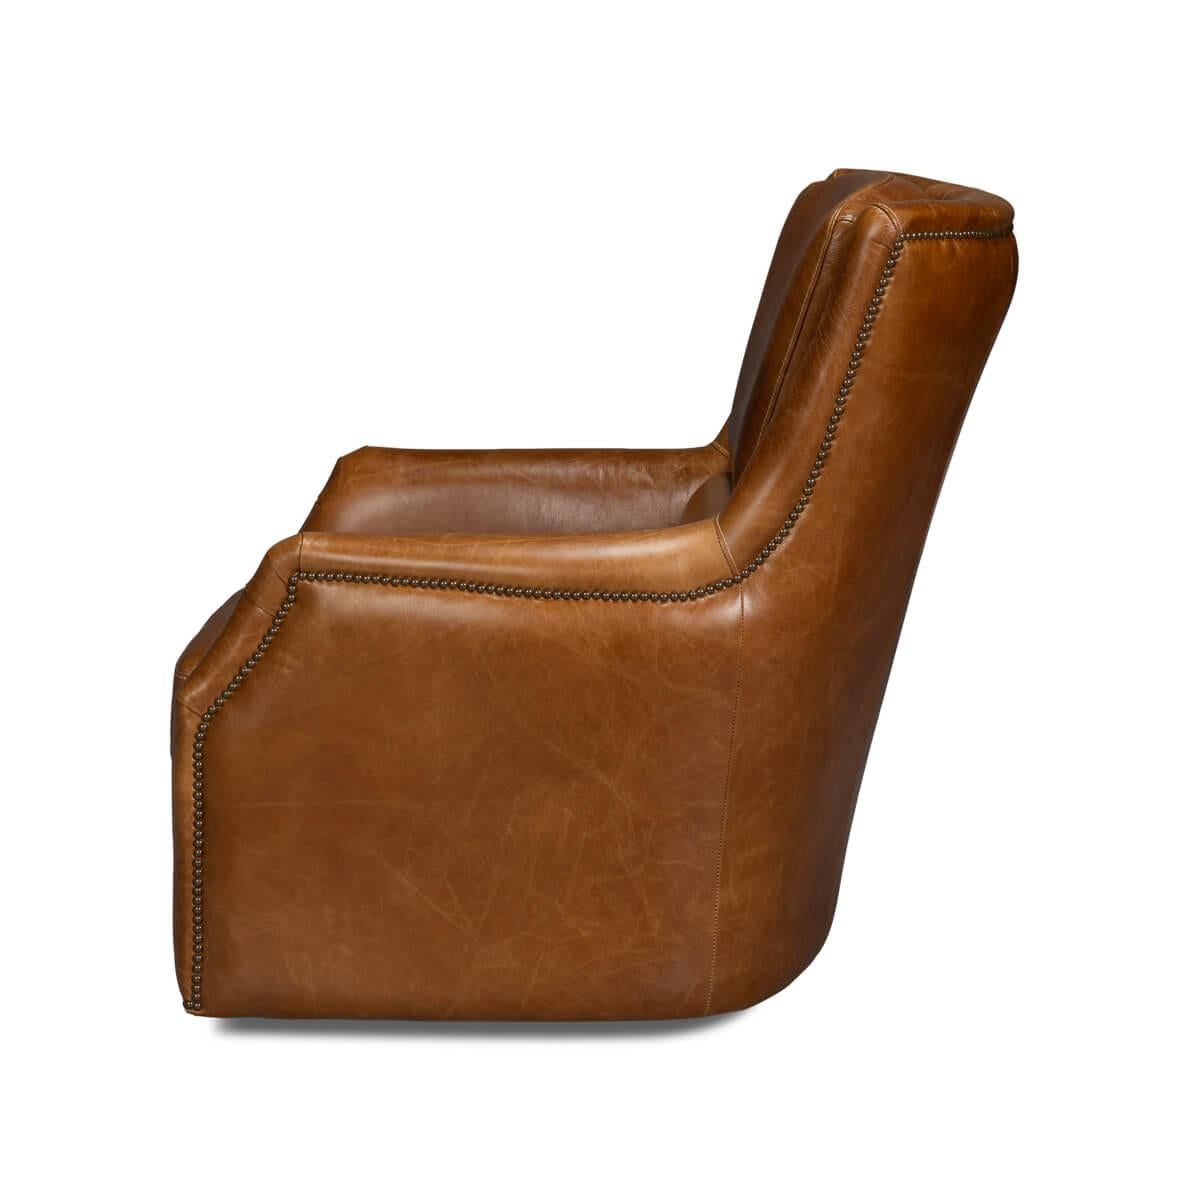 American Classical Traditional Brown Leather Swivel Chair For Sale